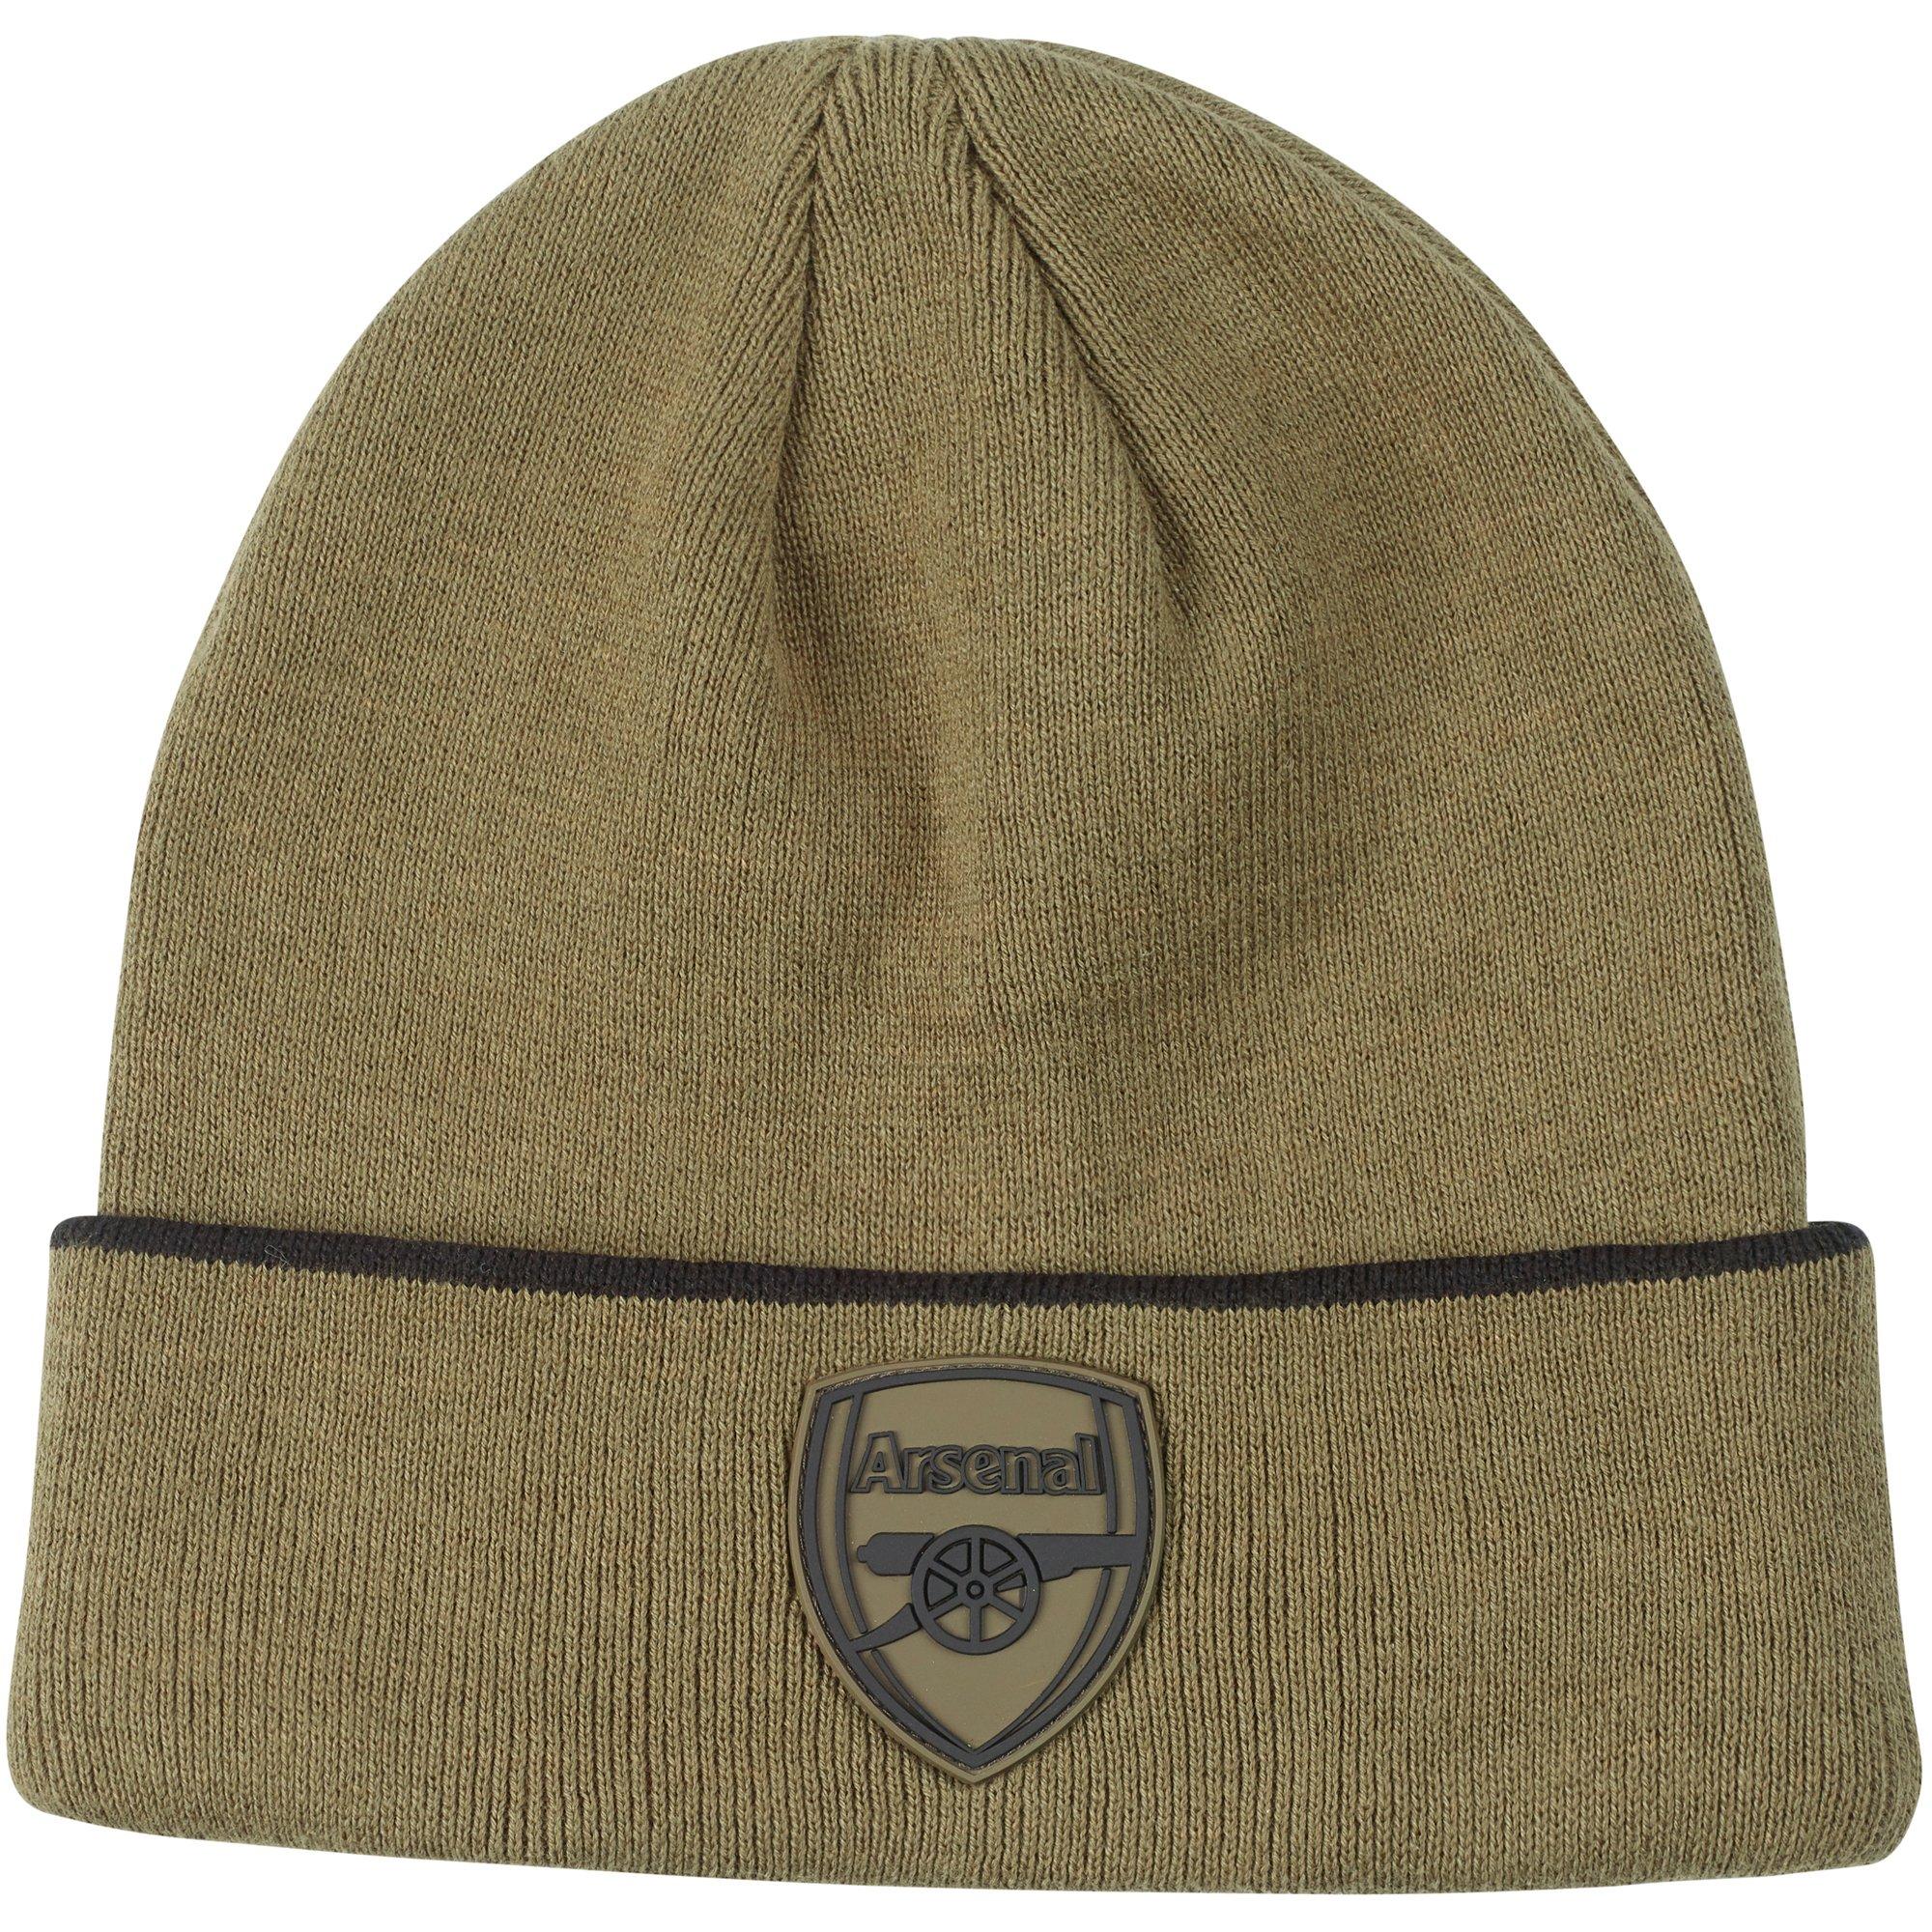 Arsenal FC Navy Knitted Hat TU